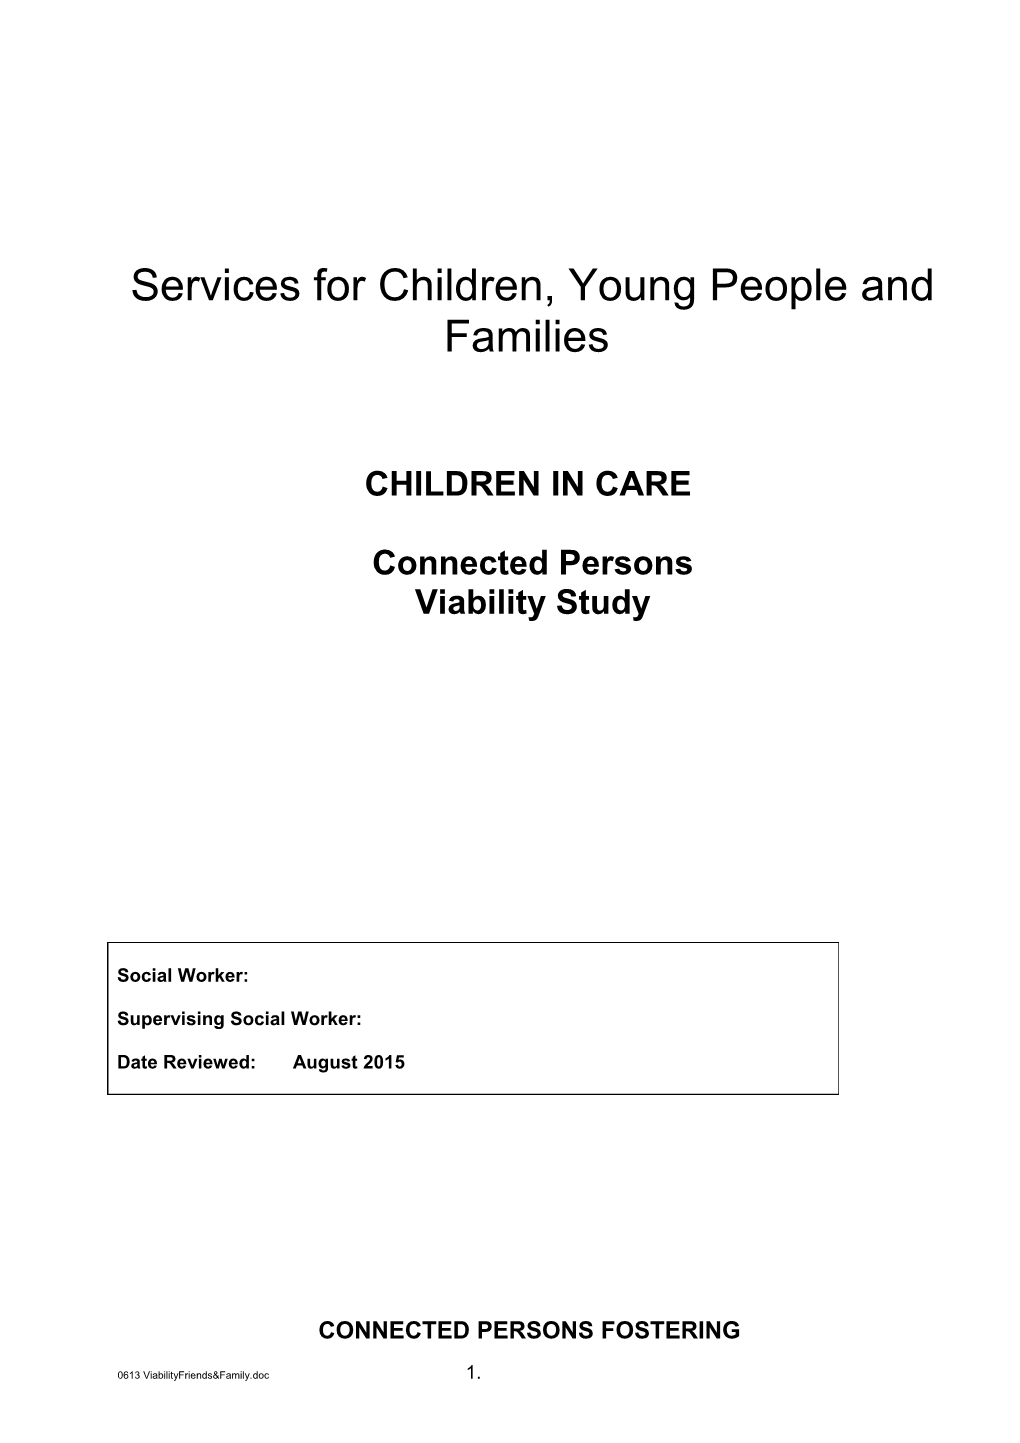 Services for Children, Young People and Families